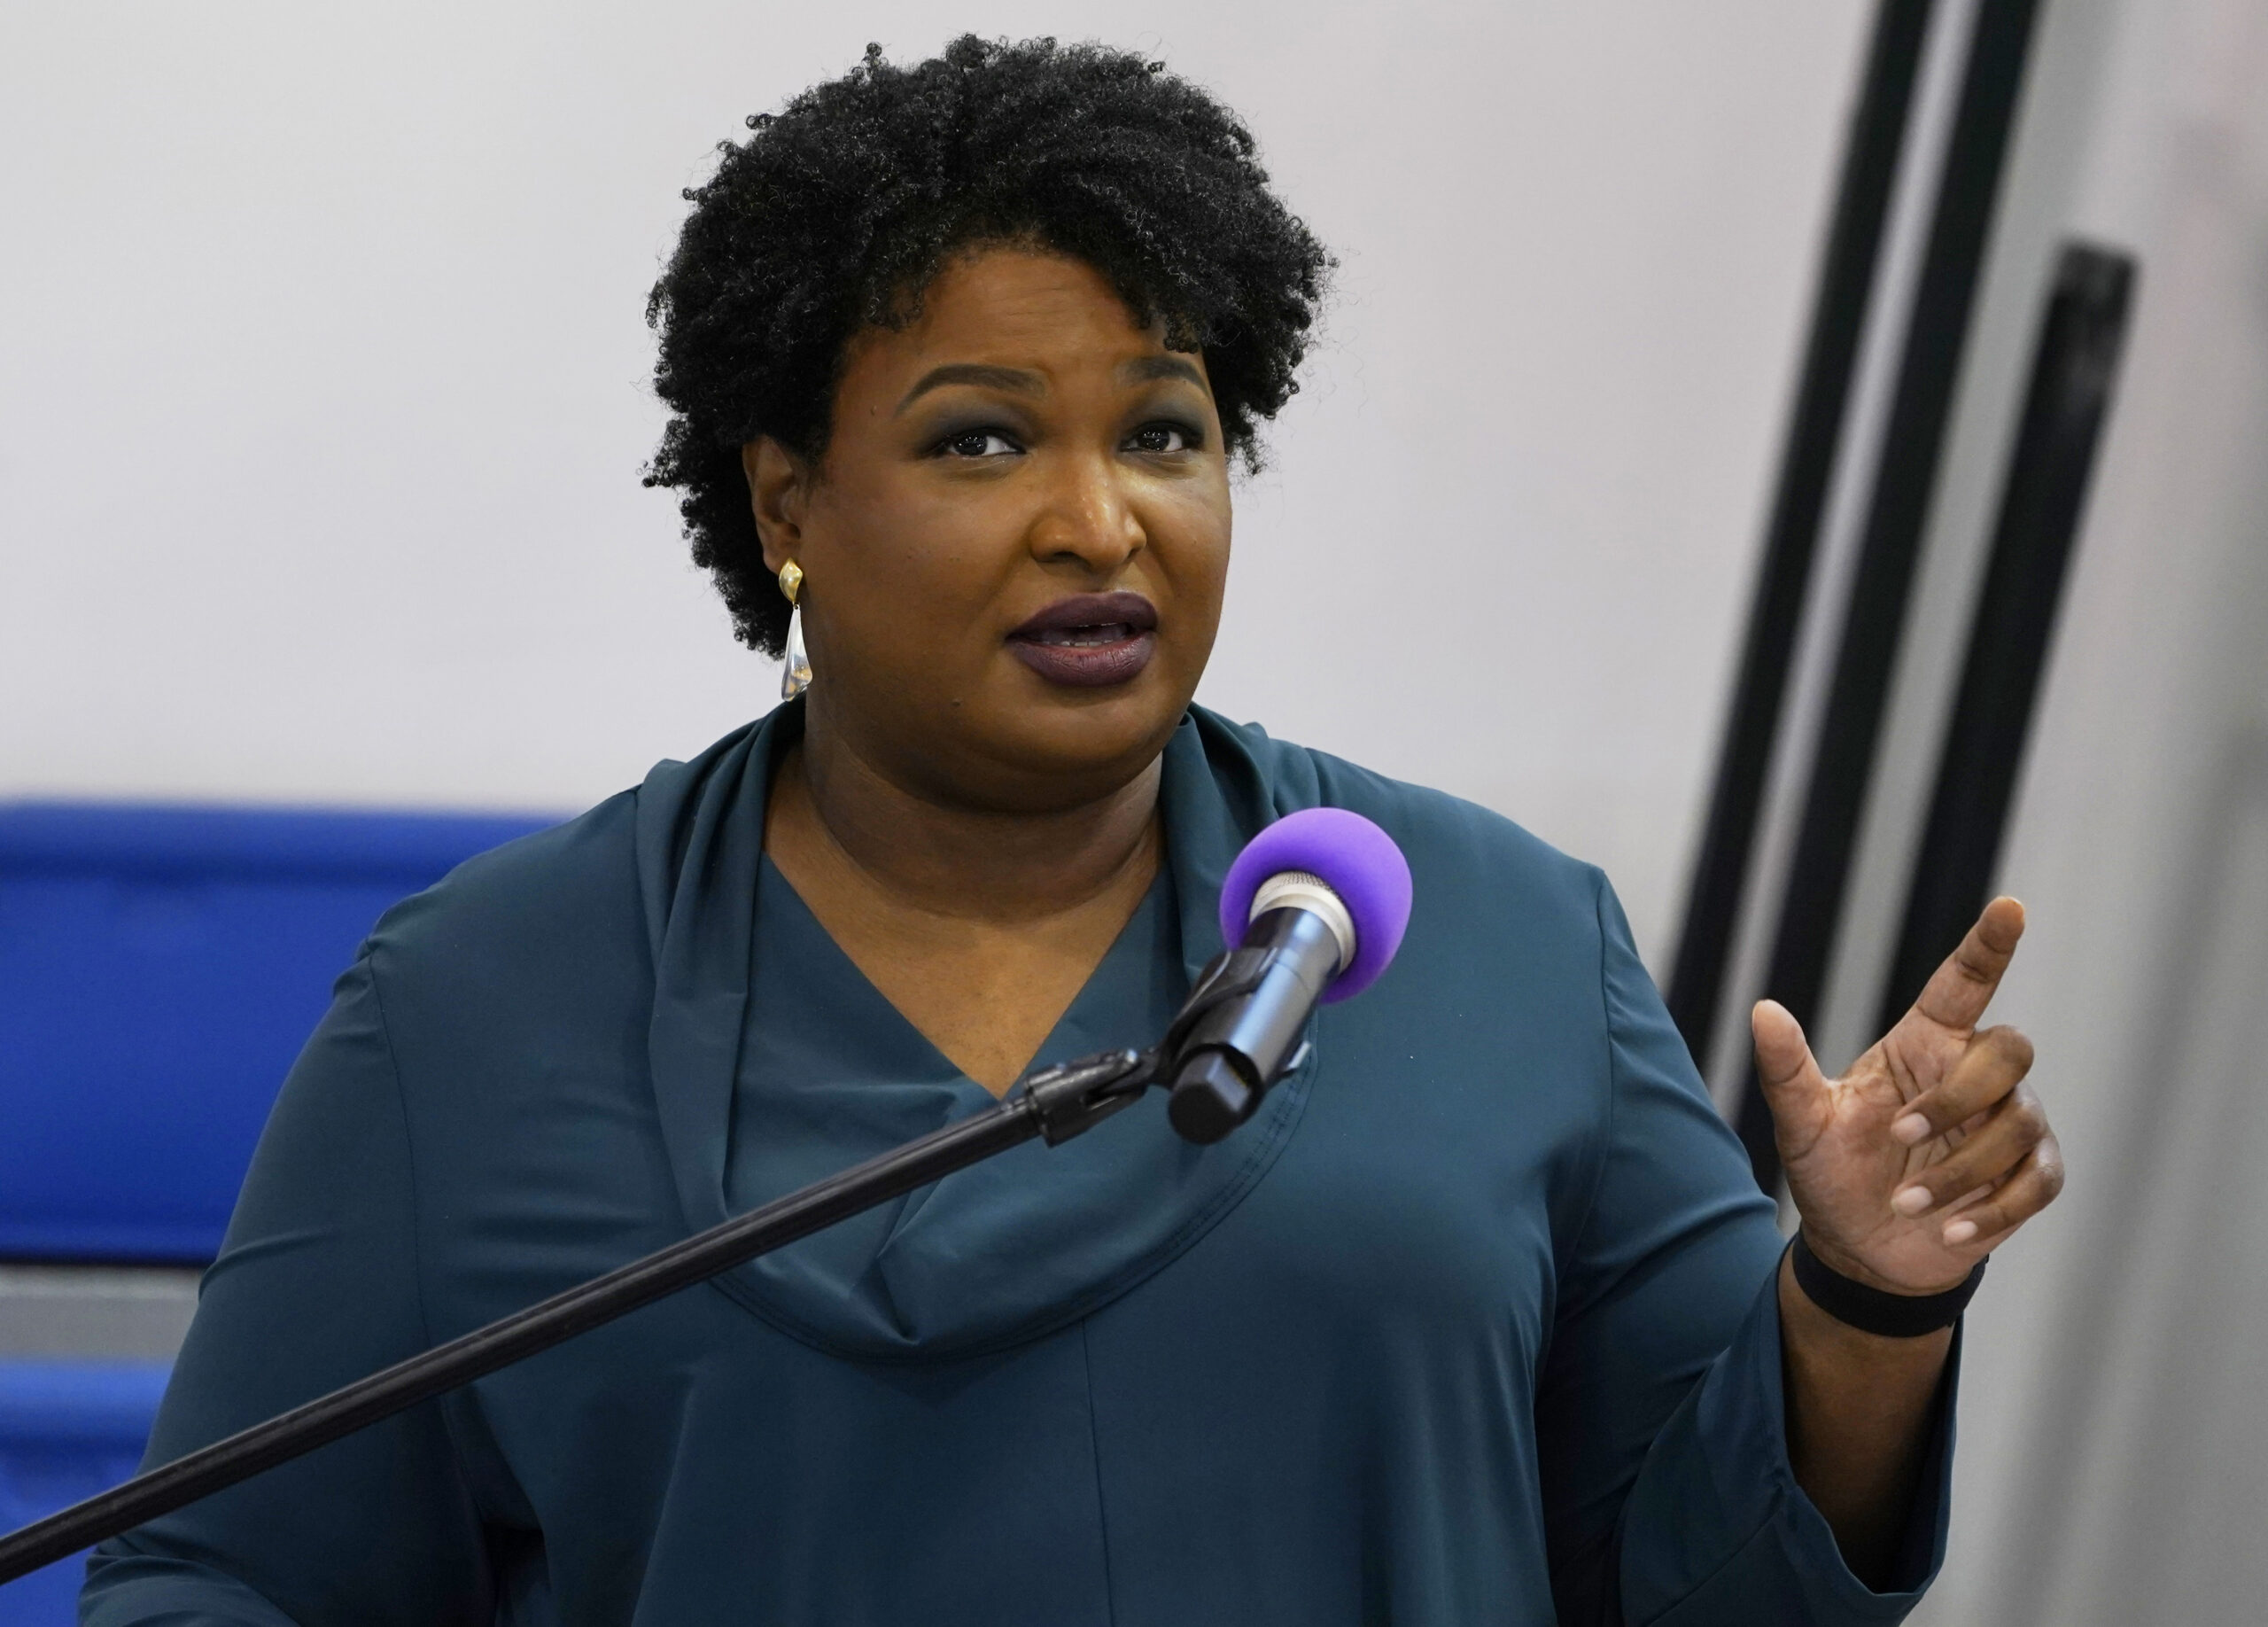 FILE - Stacey Abrams speaks during a church service in Norfolk, Va., Sunday, Oct. 17, 2021. A political organization led by the Democratic titan is branching out into paying off medical debts. Fair Fight Action on Wednesday, Oct. 27 told The Associated Press that it is donating $1.34 million from its political action committee to wipe out debt owed by 108,000 people in Georgia, Arizona, Louisiana, Mississippi and Alabama. (AP Photo/Steve Helber, File)